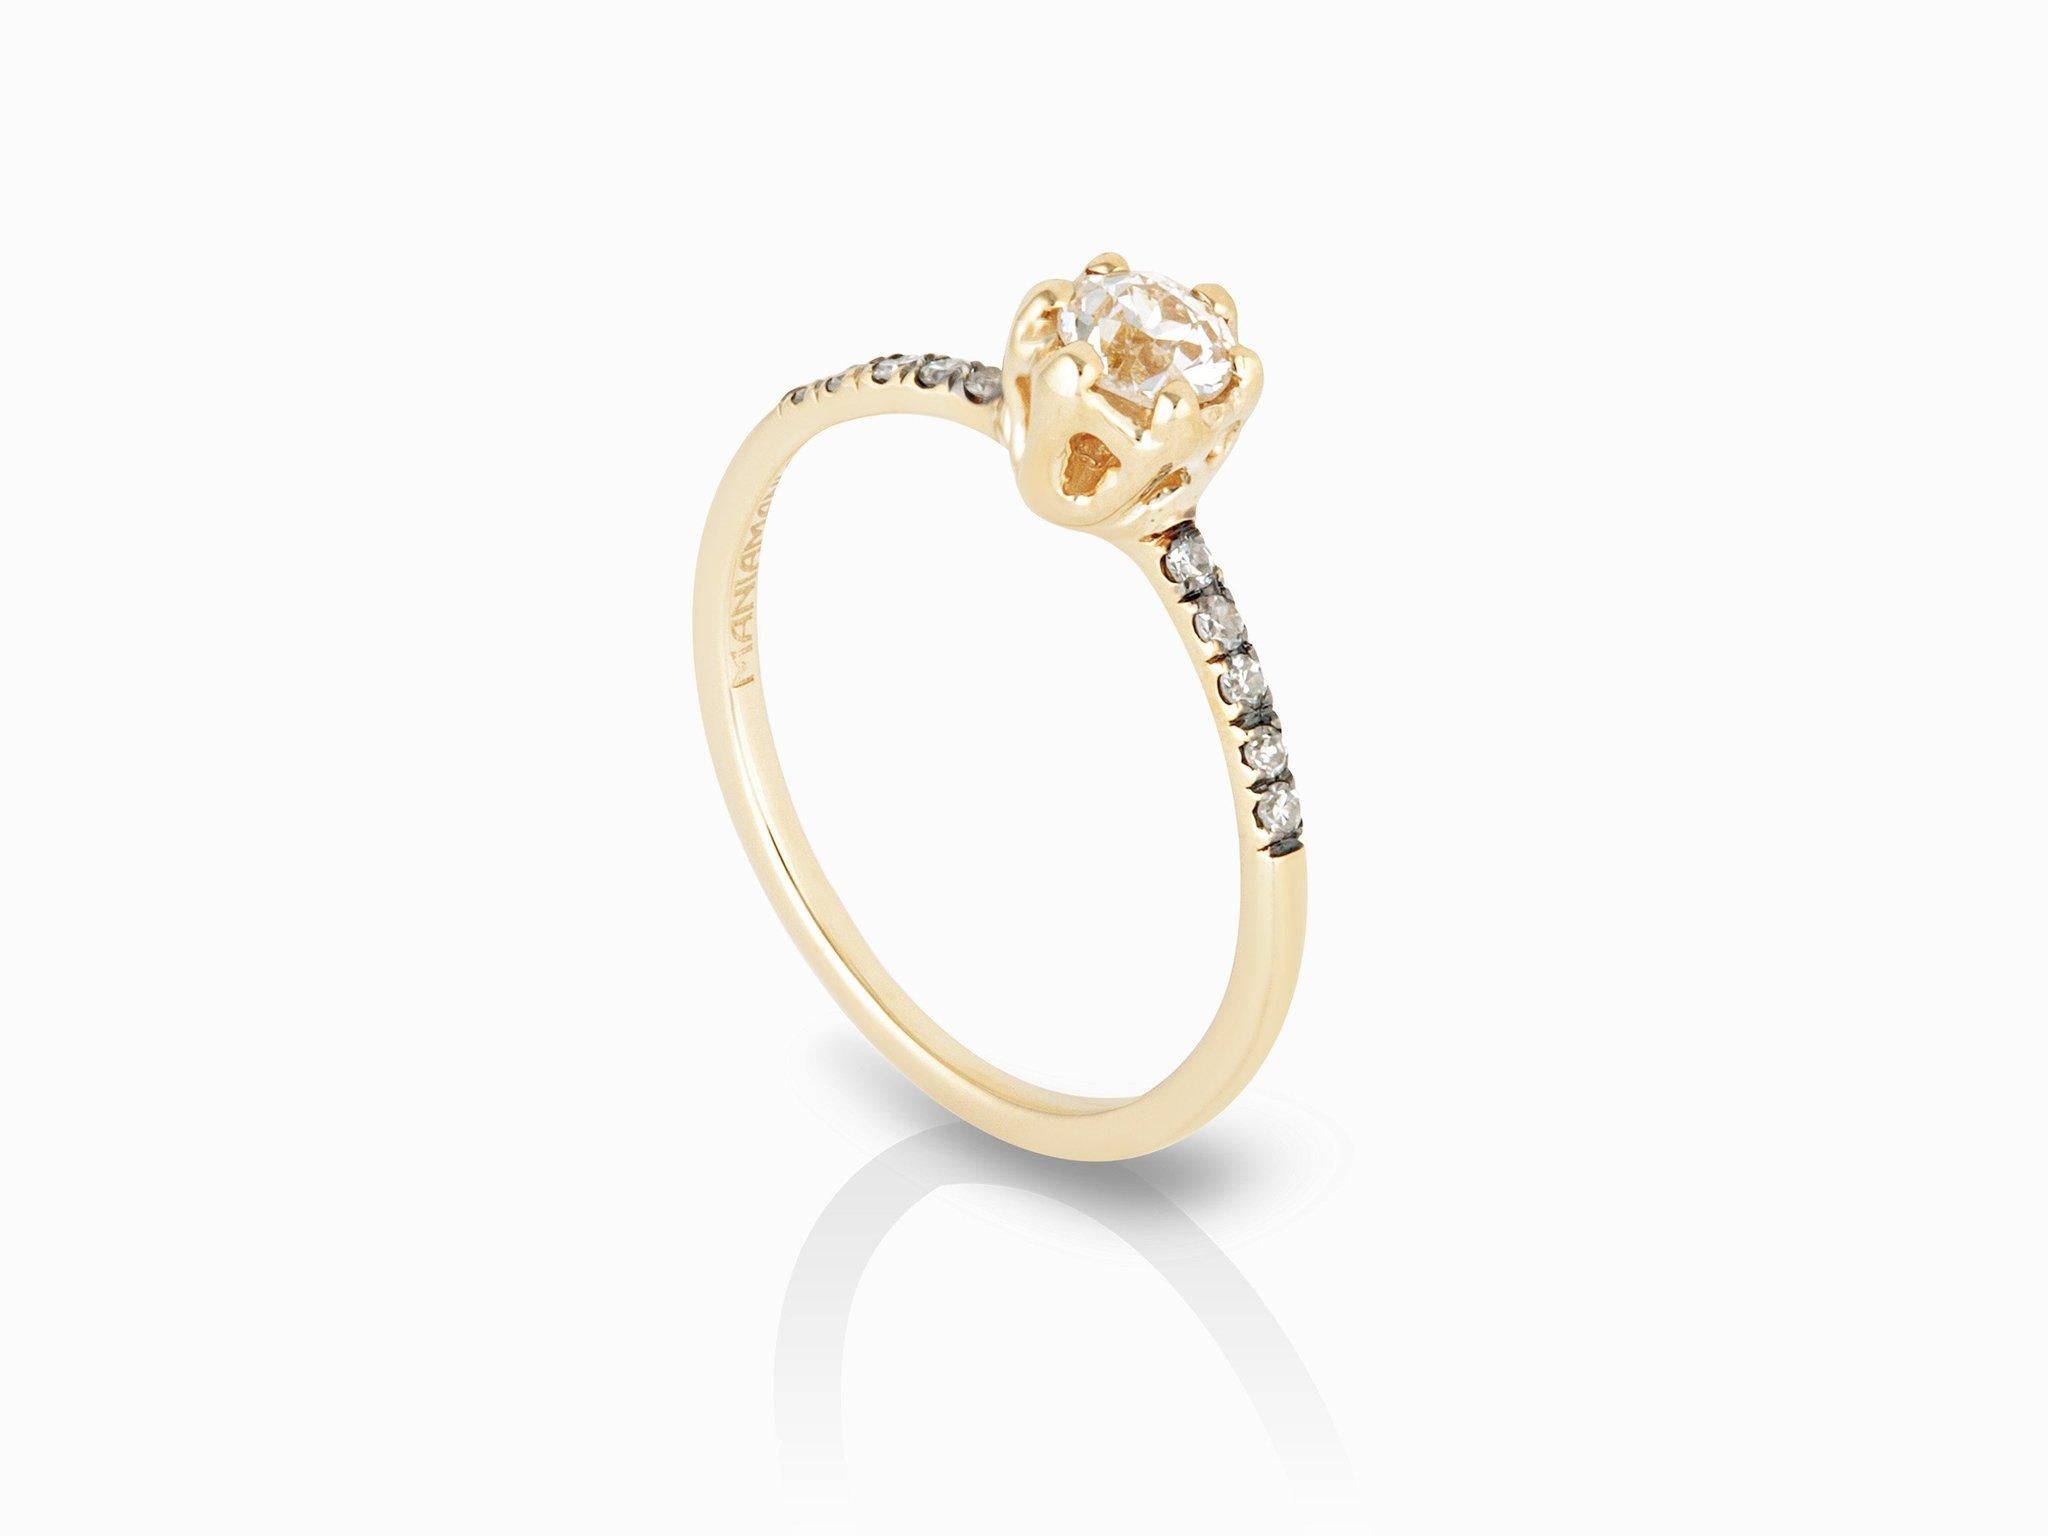 MANIAMANIA Entity Engagement ring in 14k yellow gold with White Diamonds ring with one 4mm round old European cut white Diamond (0.28-0.34ct), with pave of white Diamonds (.1ctw). Size 5.75.

Hand made in NYC, the 14k gold Entity ring features an